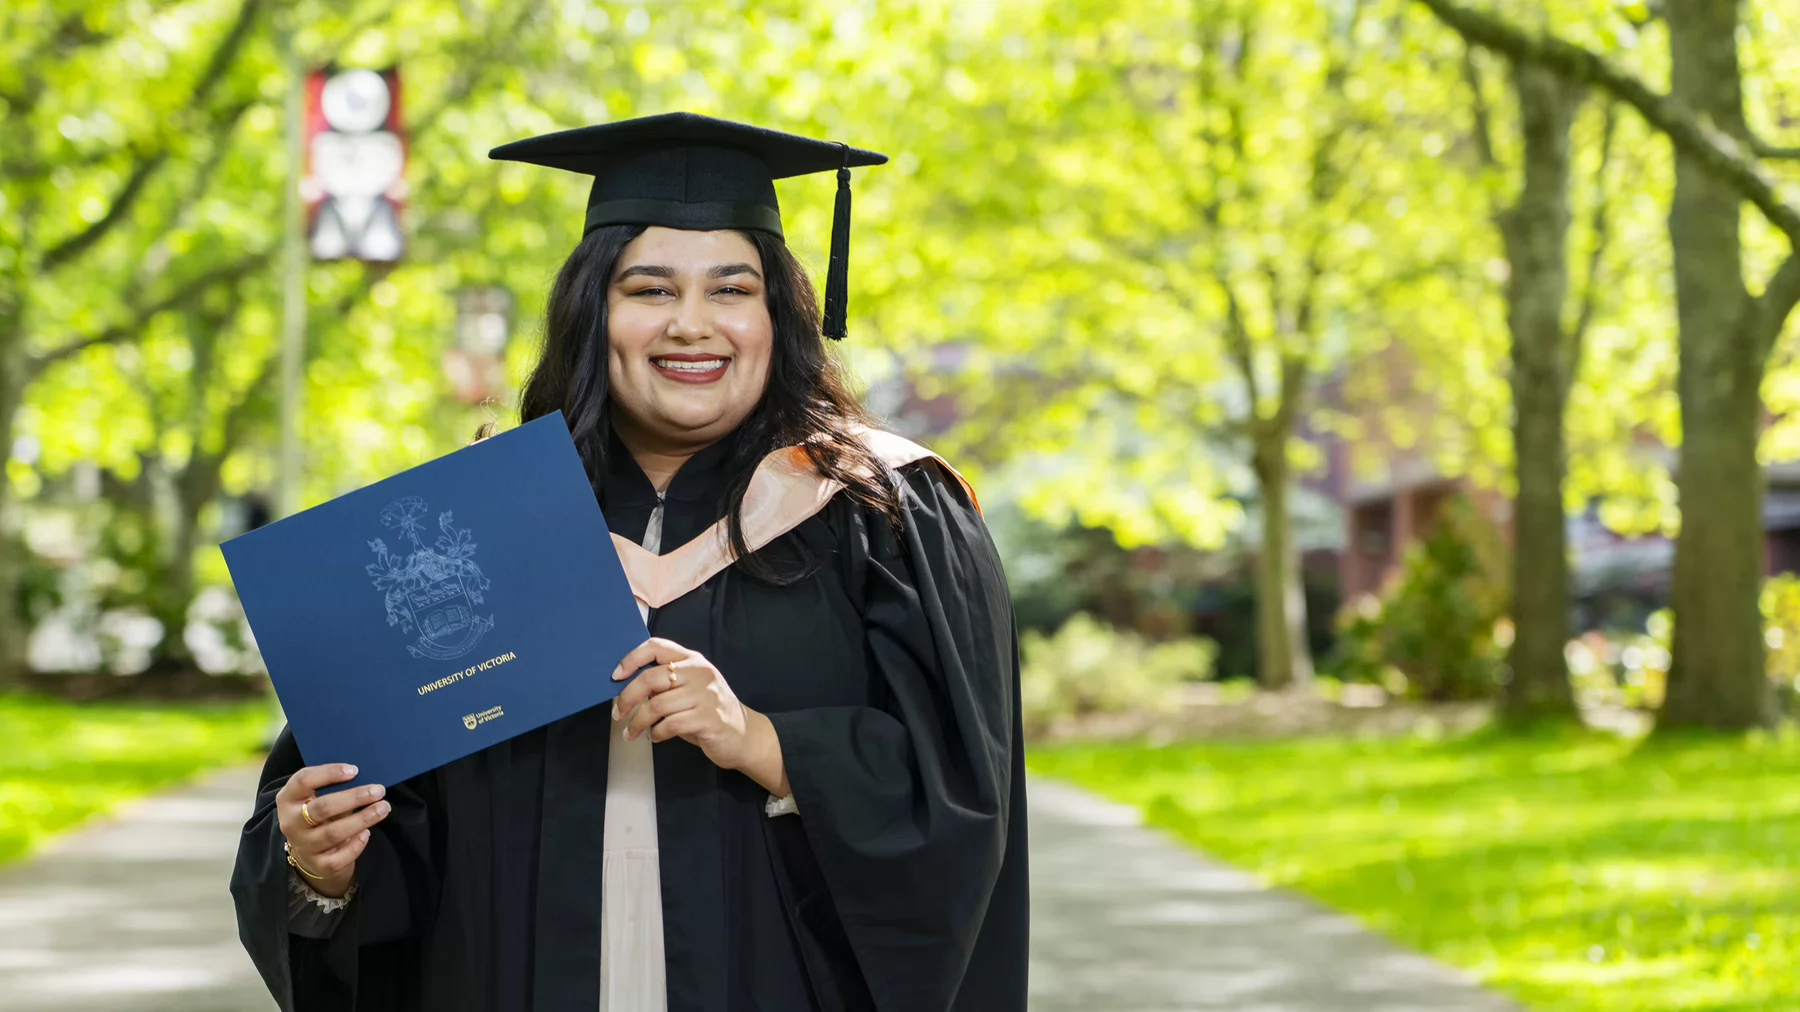 A person dressed in academic regalia (cap and gown) smiles, holding a degree cover, standing on a path surrounded by trees.